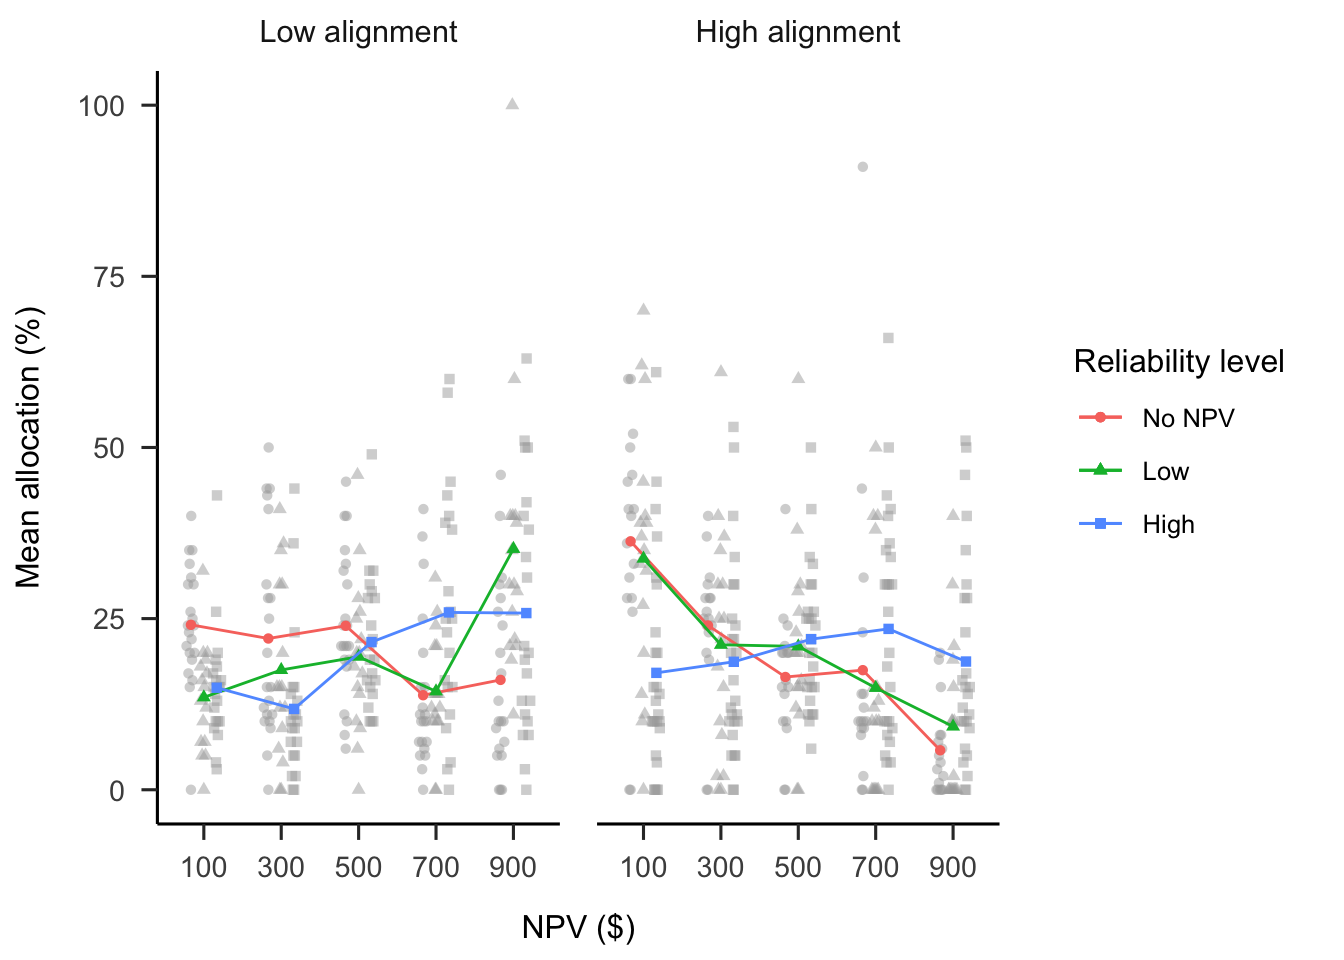 Mean allocation across NPV, by project alignment and reliability level conditions. In mixed factorial designs, error bars cannot be used to make inferences by “eye” across all conditions. Therefore, error bars are not included. Raw data are plotted in the background. When interpreting this figure, consider the linear trends in NPV.